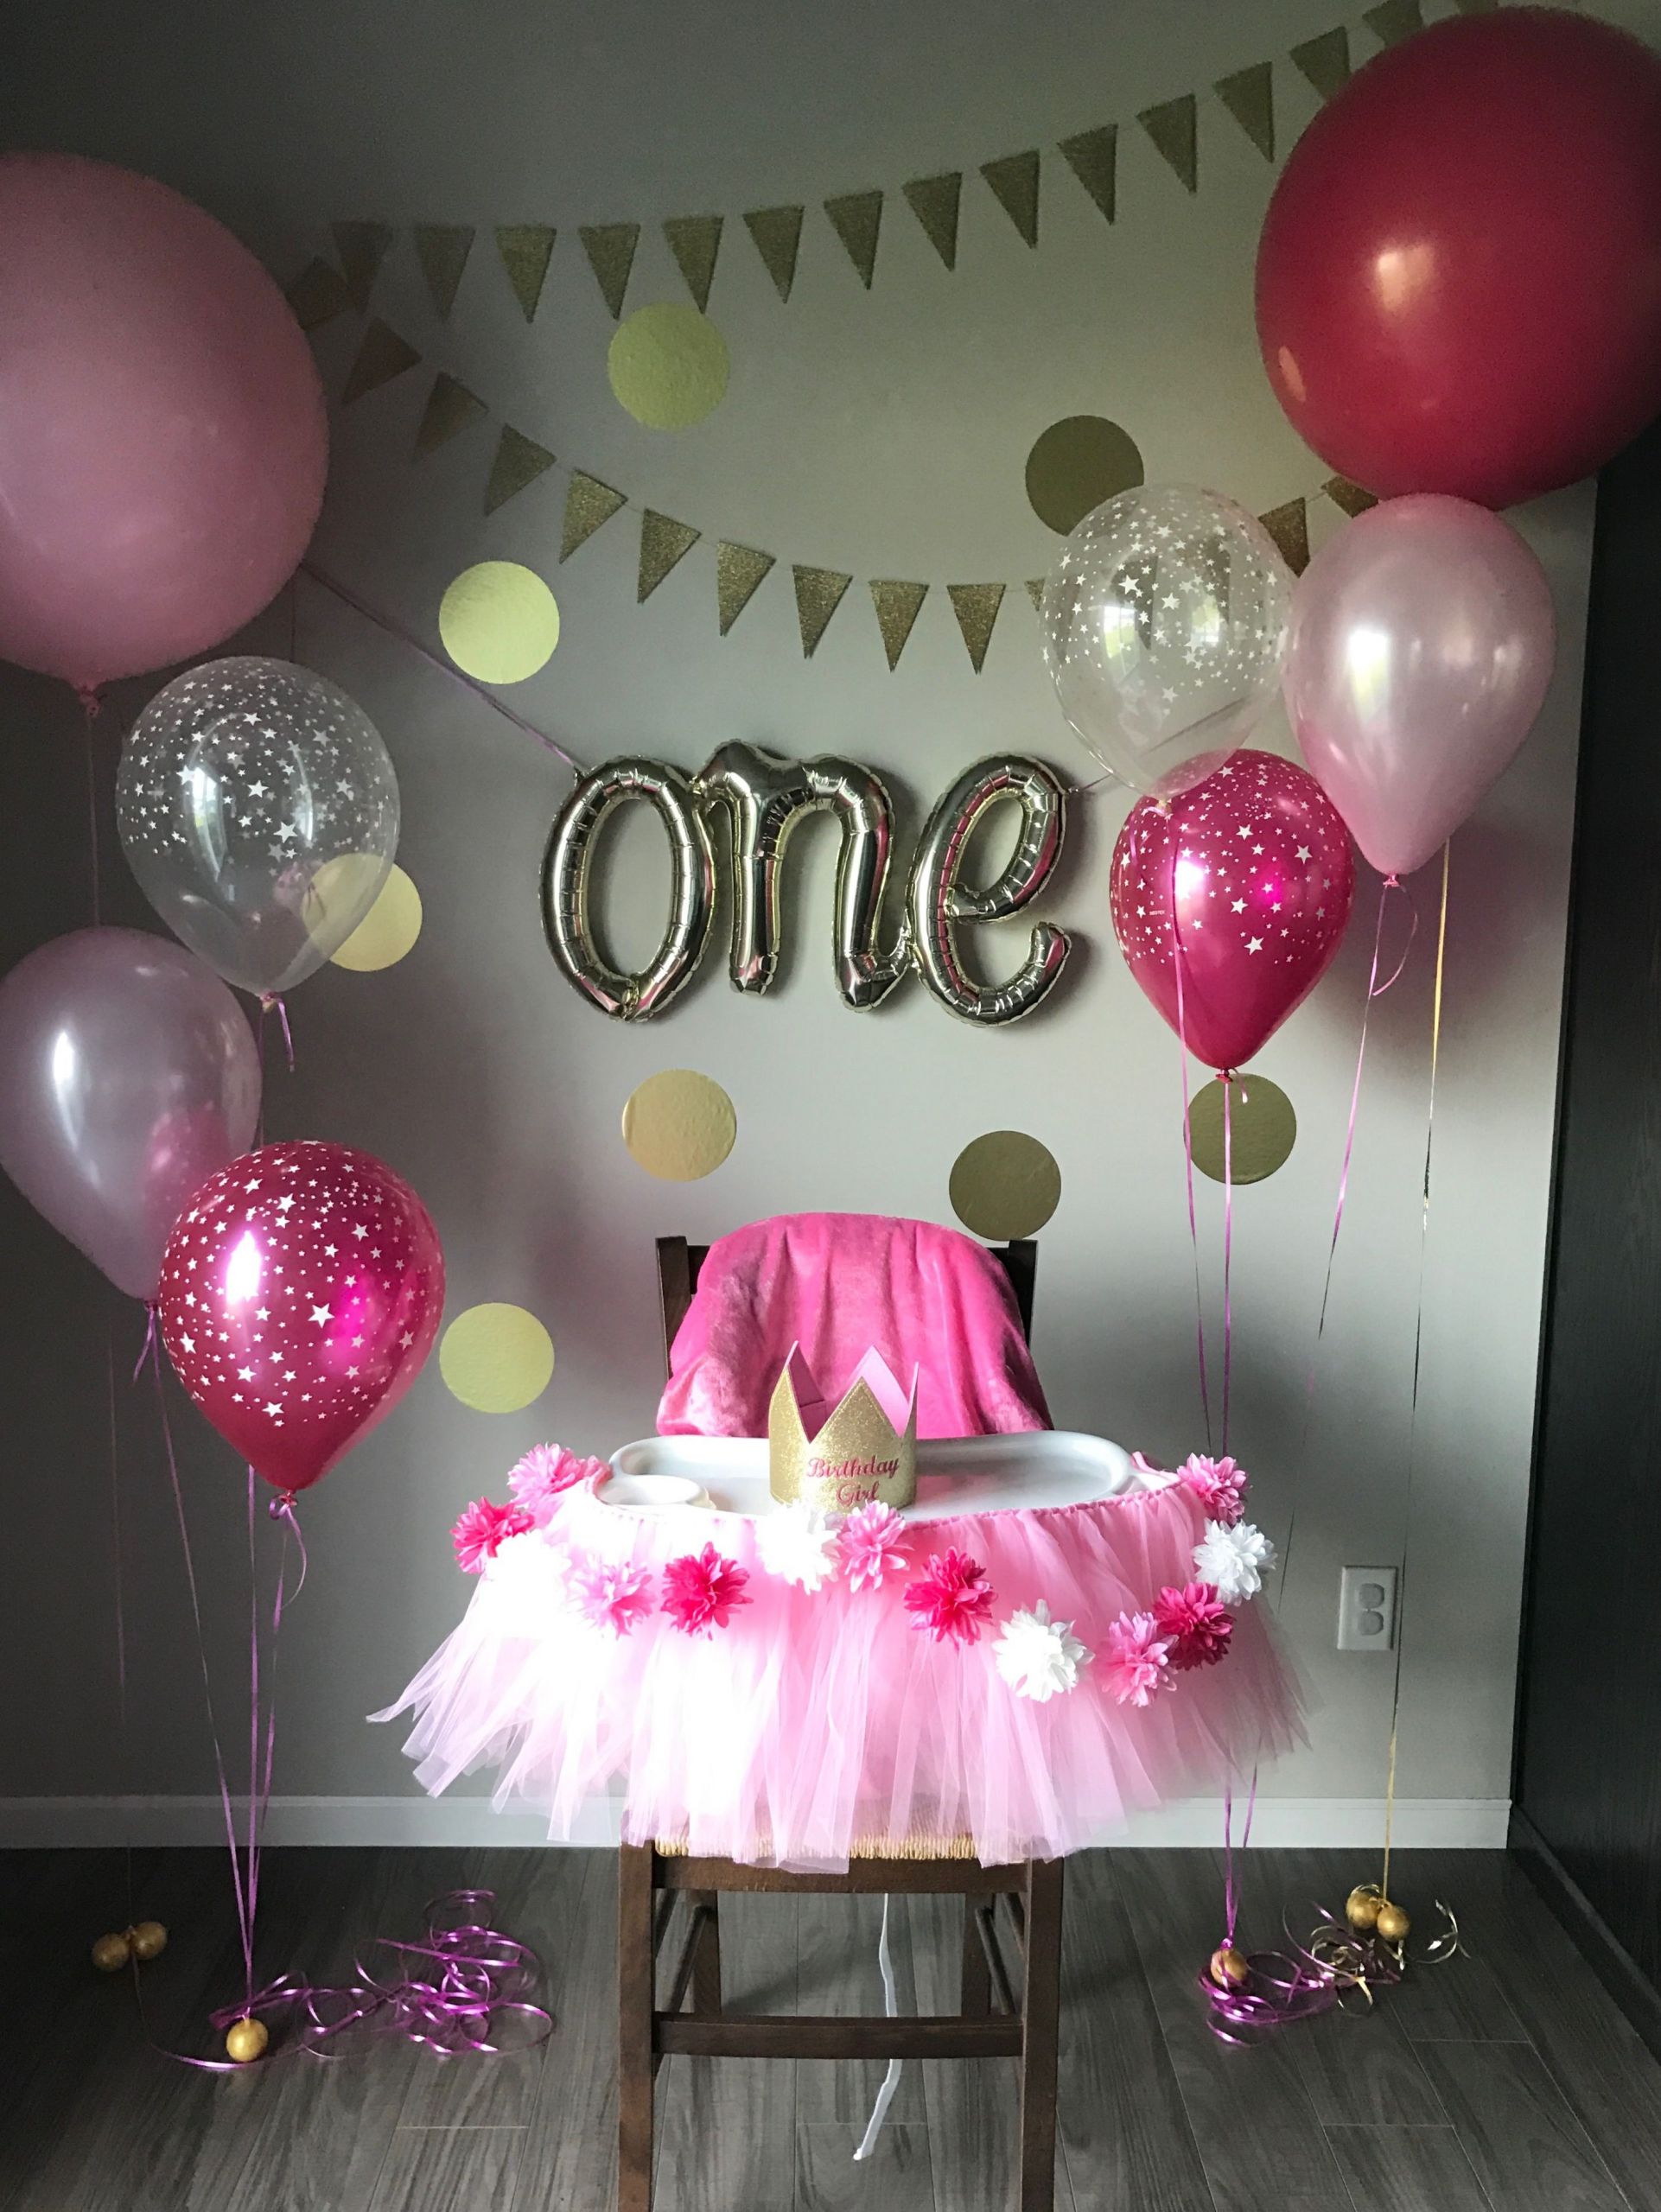 Party Ideas For 1 Year Old Baby Girl
 First birthday party … in 2019